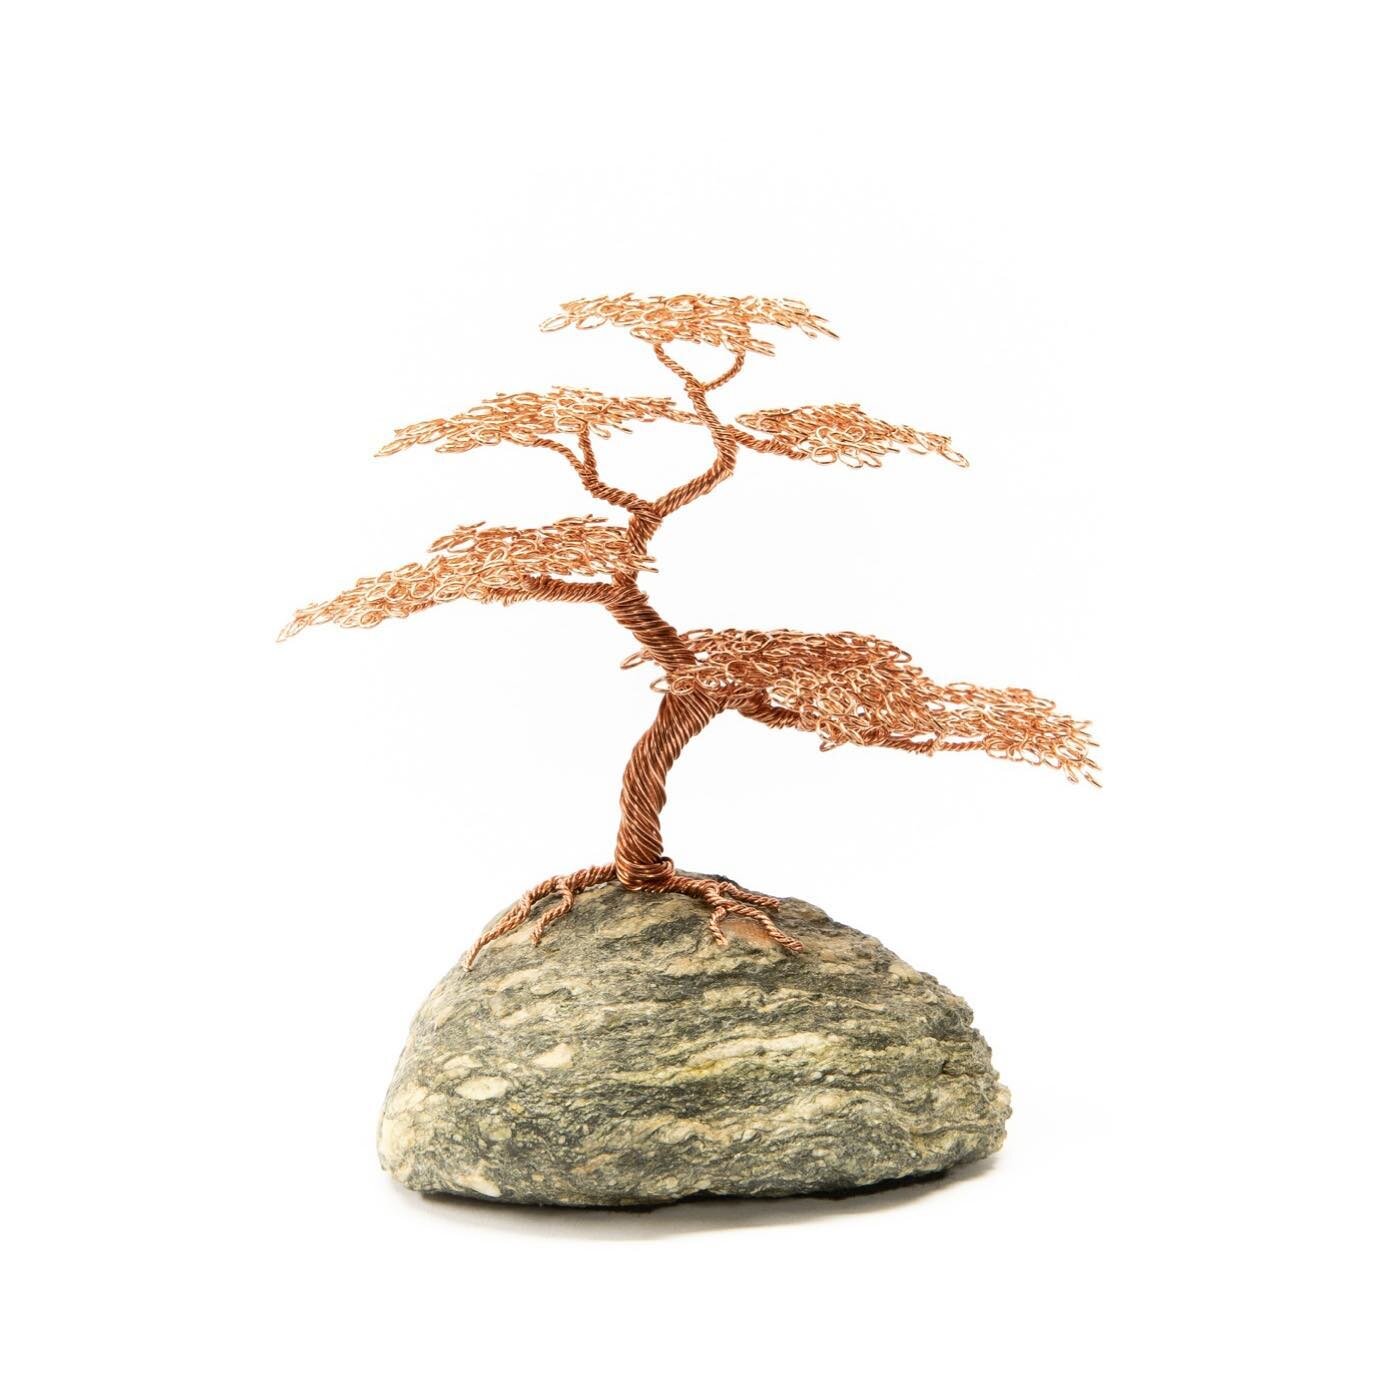 &ldquo;Inner Balance II&rdquo;
Commissioned
Copper wire on stone
5&rdquo;x5&rdquo;x4&rdquo;
.
This small copper wire bonsai tree was commissioned by a cool customer through Instagram!
.
It&rsquo;s been a while since I created a piece in this style an